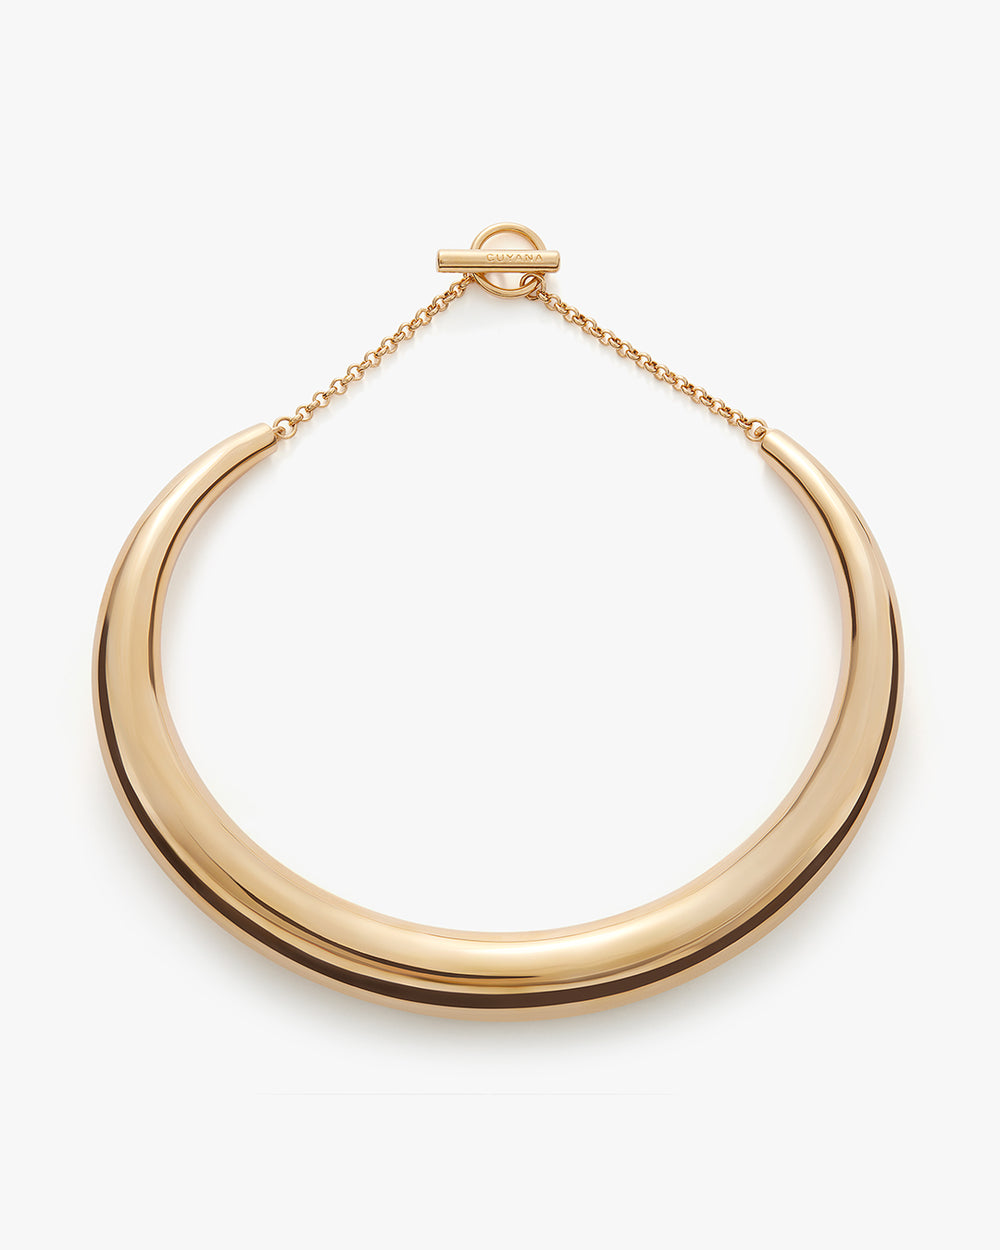 Smooth, curved necklace with a chain fastener at the top.